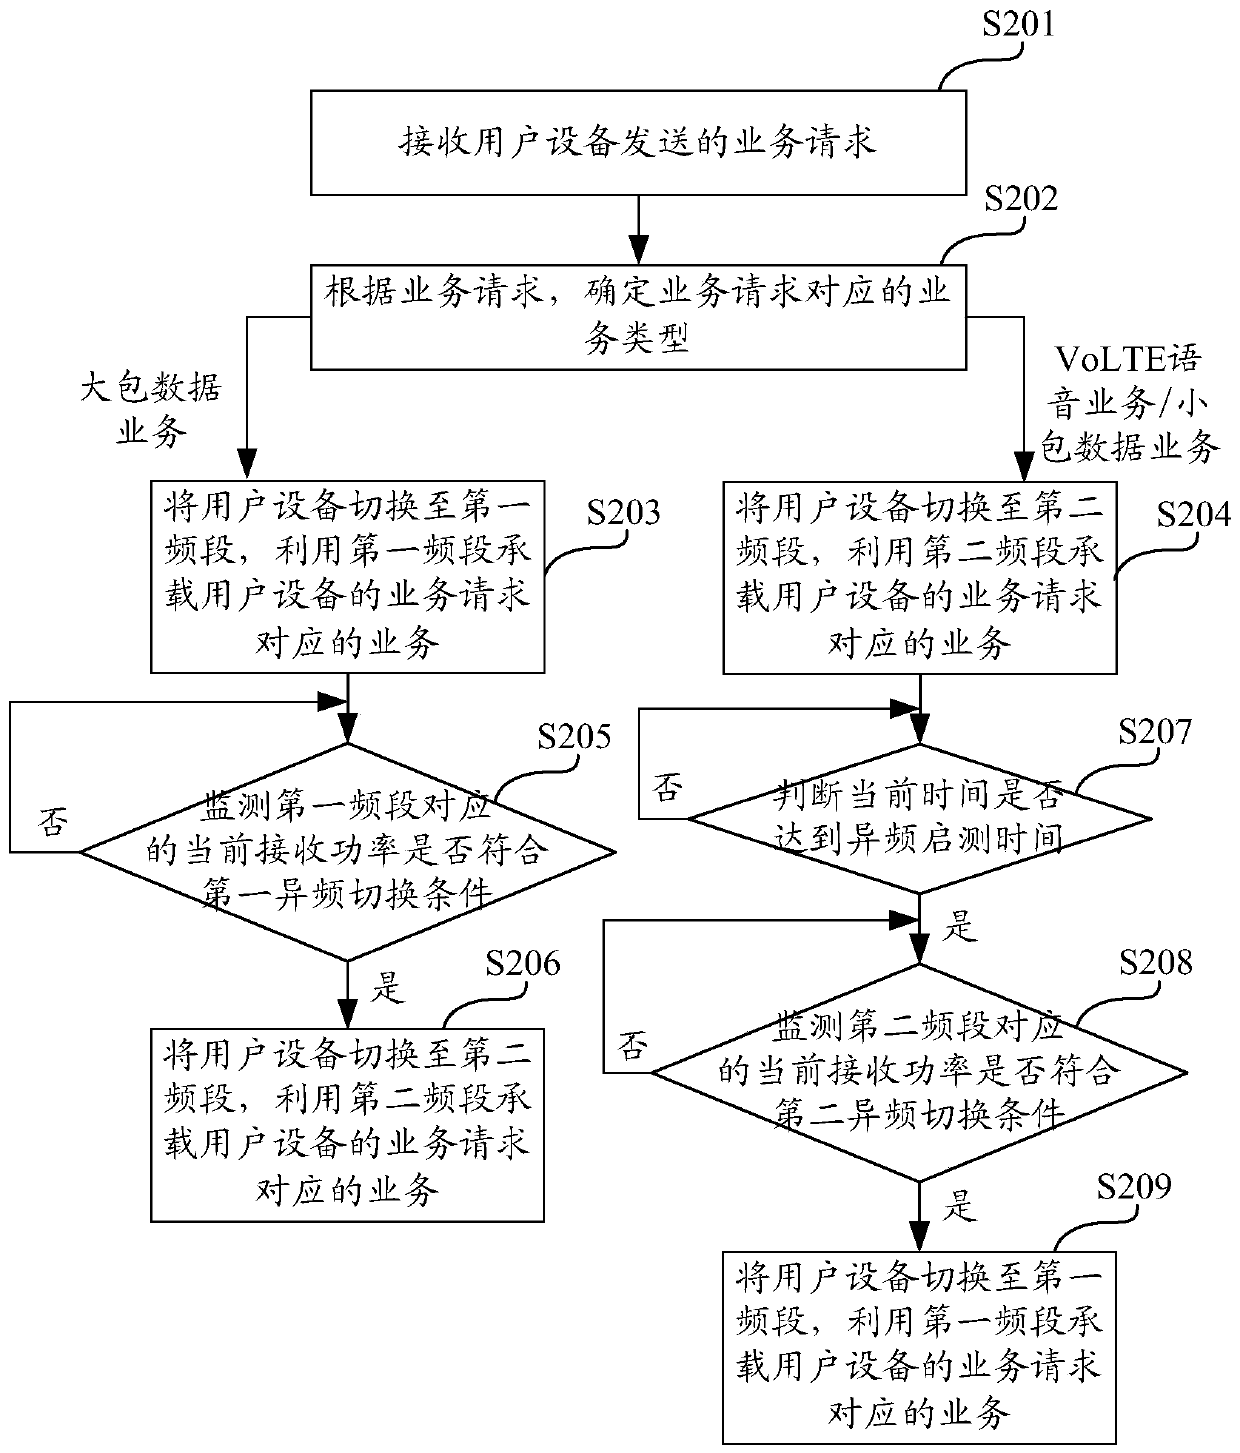 Business hierarchical processing method and device for VoLTE voice business and data business